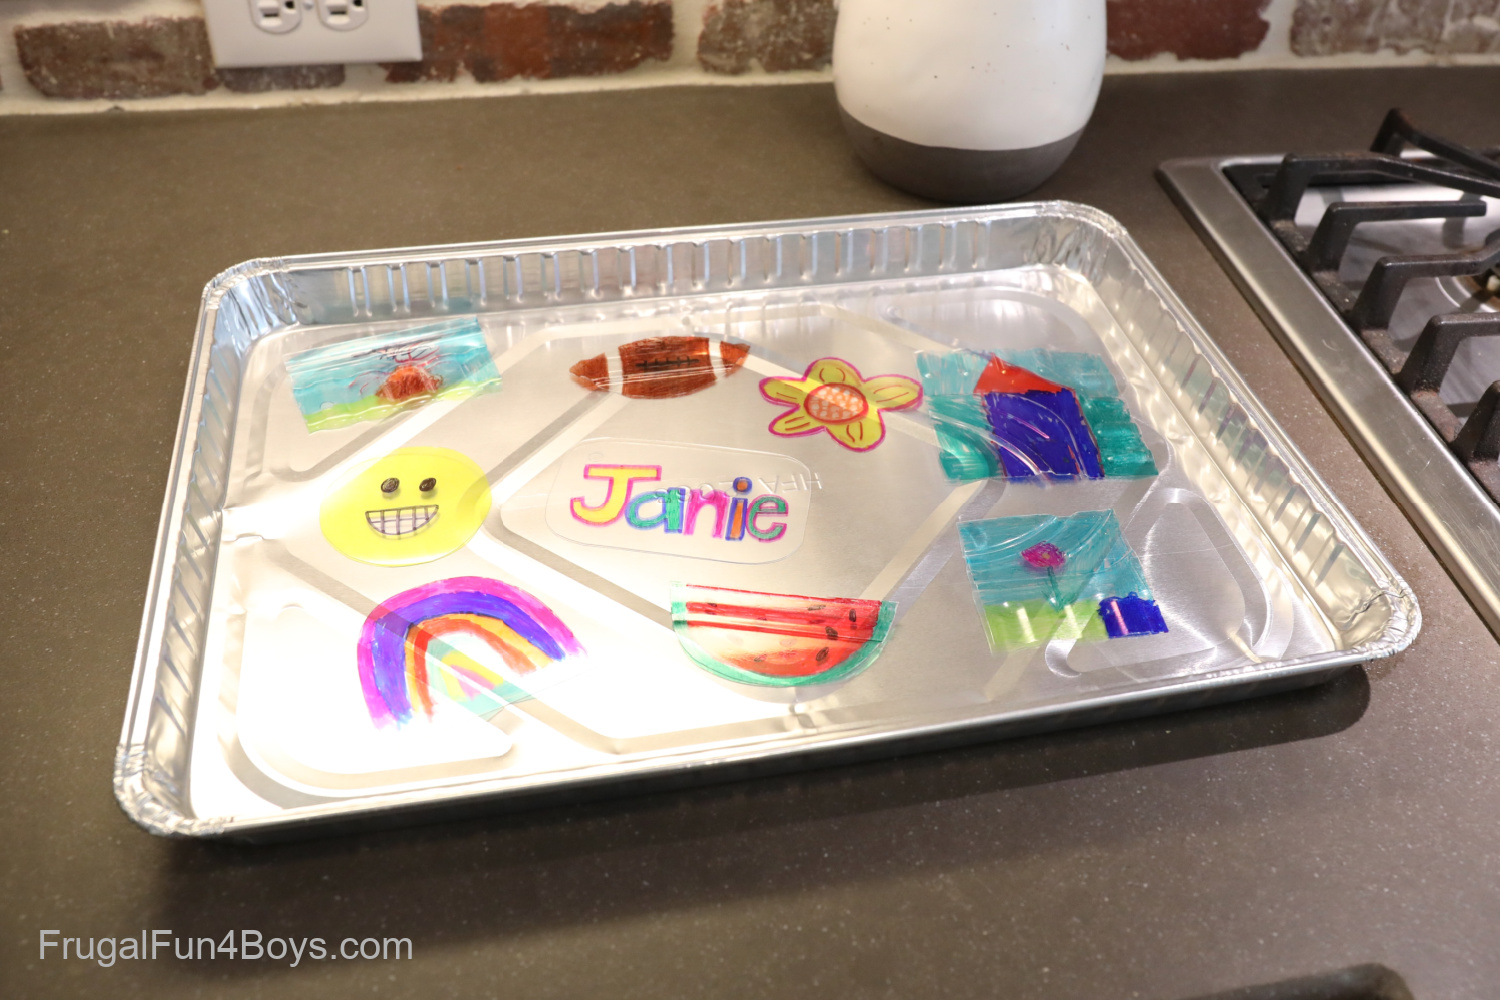 Can you shrink Shrinky Dinks in an Easy Bake Oven?